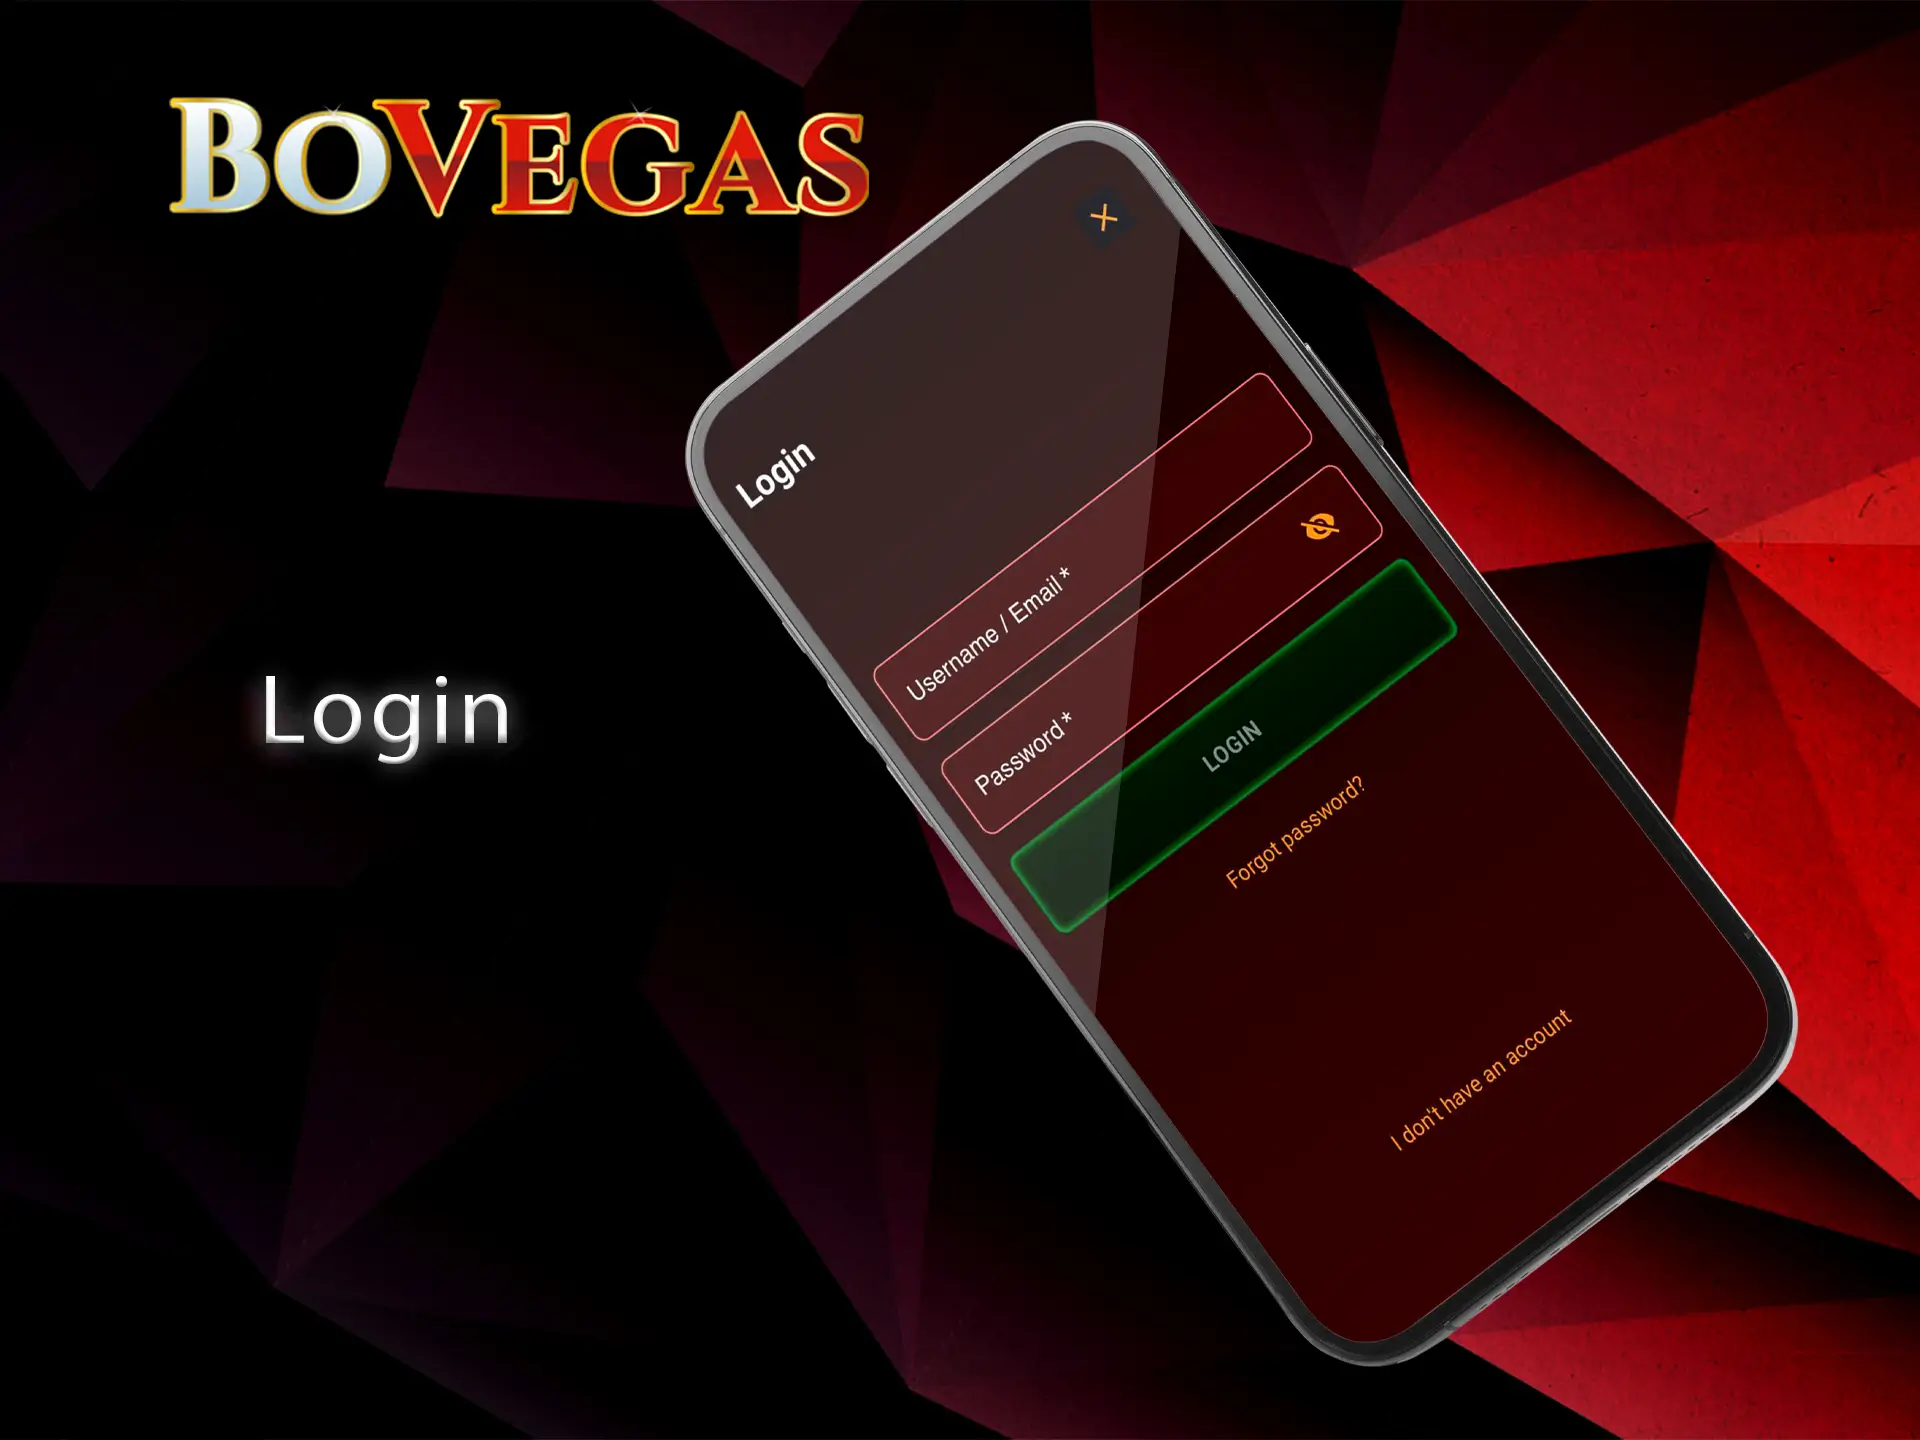 Log in to your account to access casino games at the BoVegas mobile.